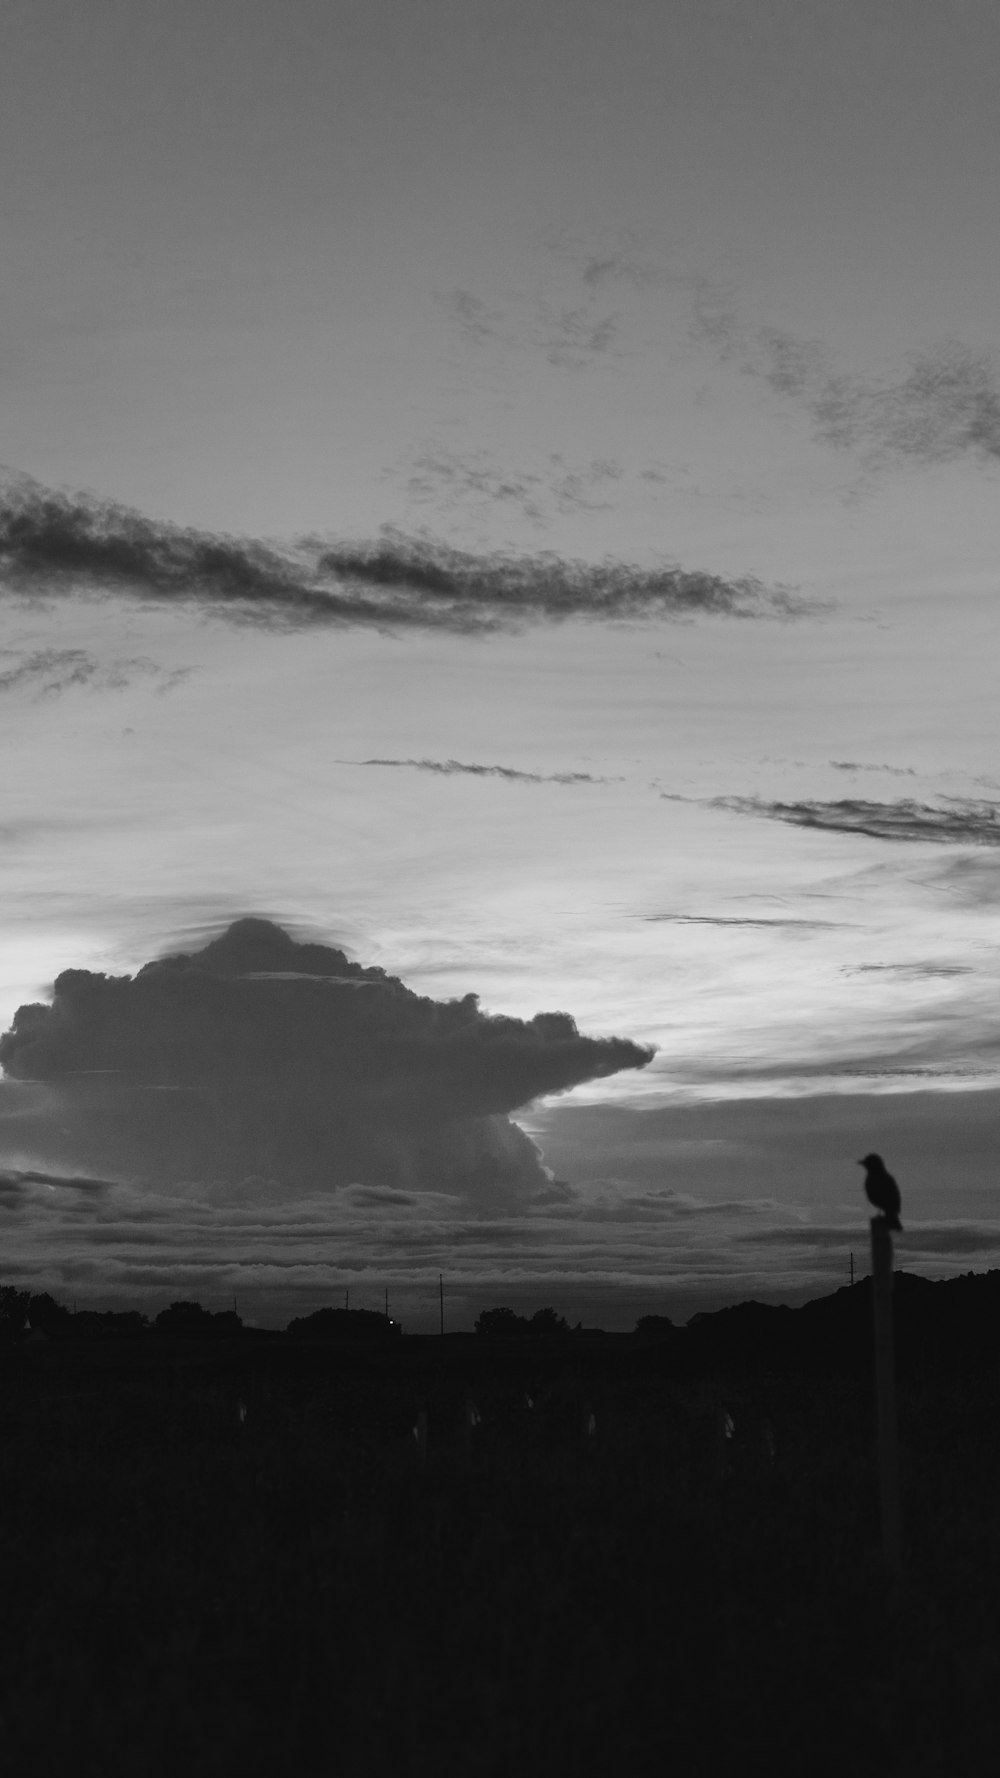 silhouette of person standing on rock formation under cloudy sky during daytime